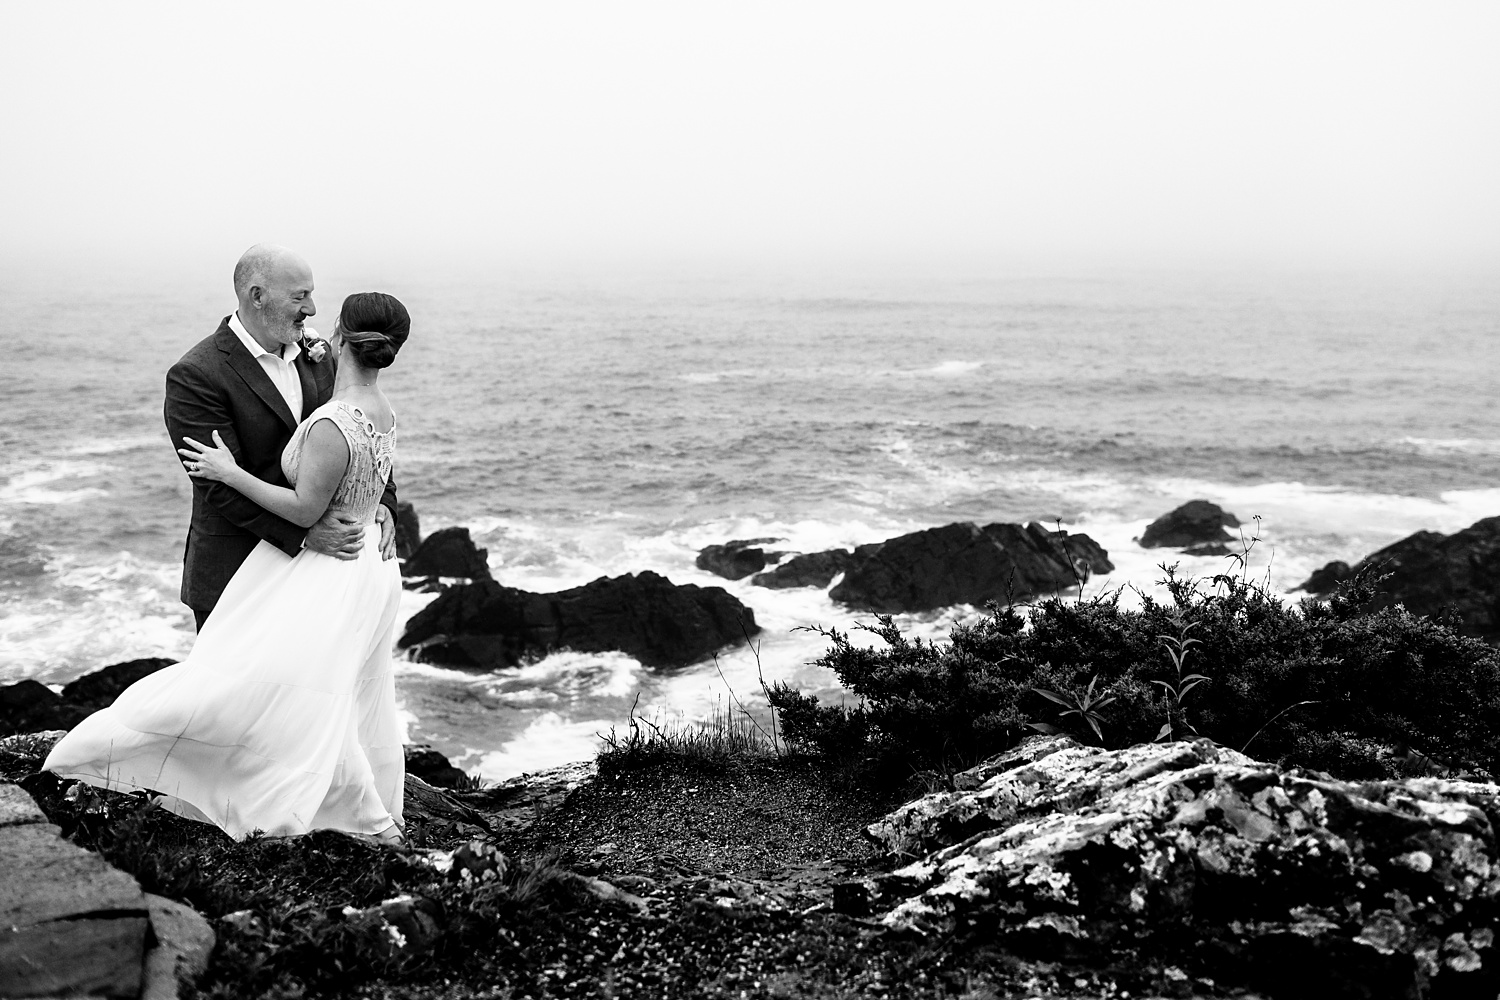 Romantic winds and foggy weather on their rainy sunrise elopement day in Ogunquit Maine